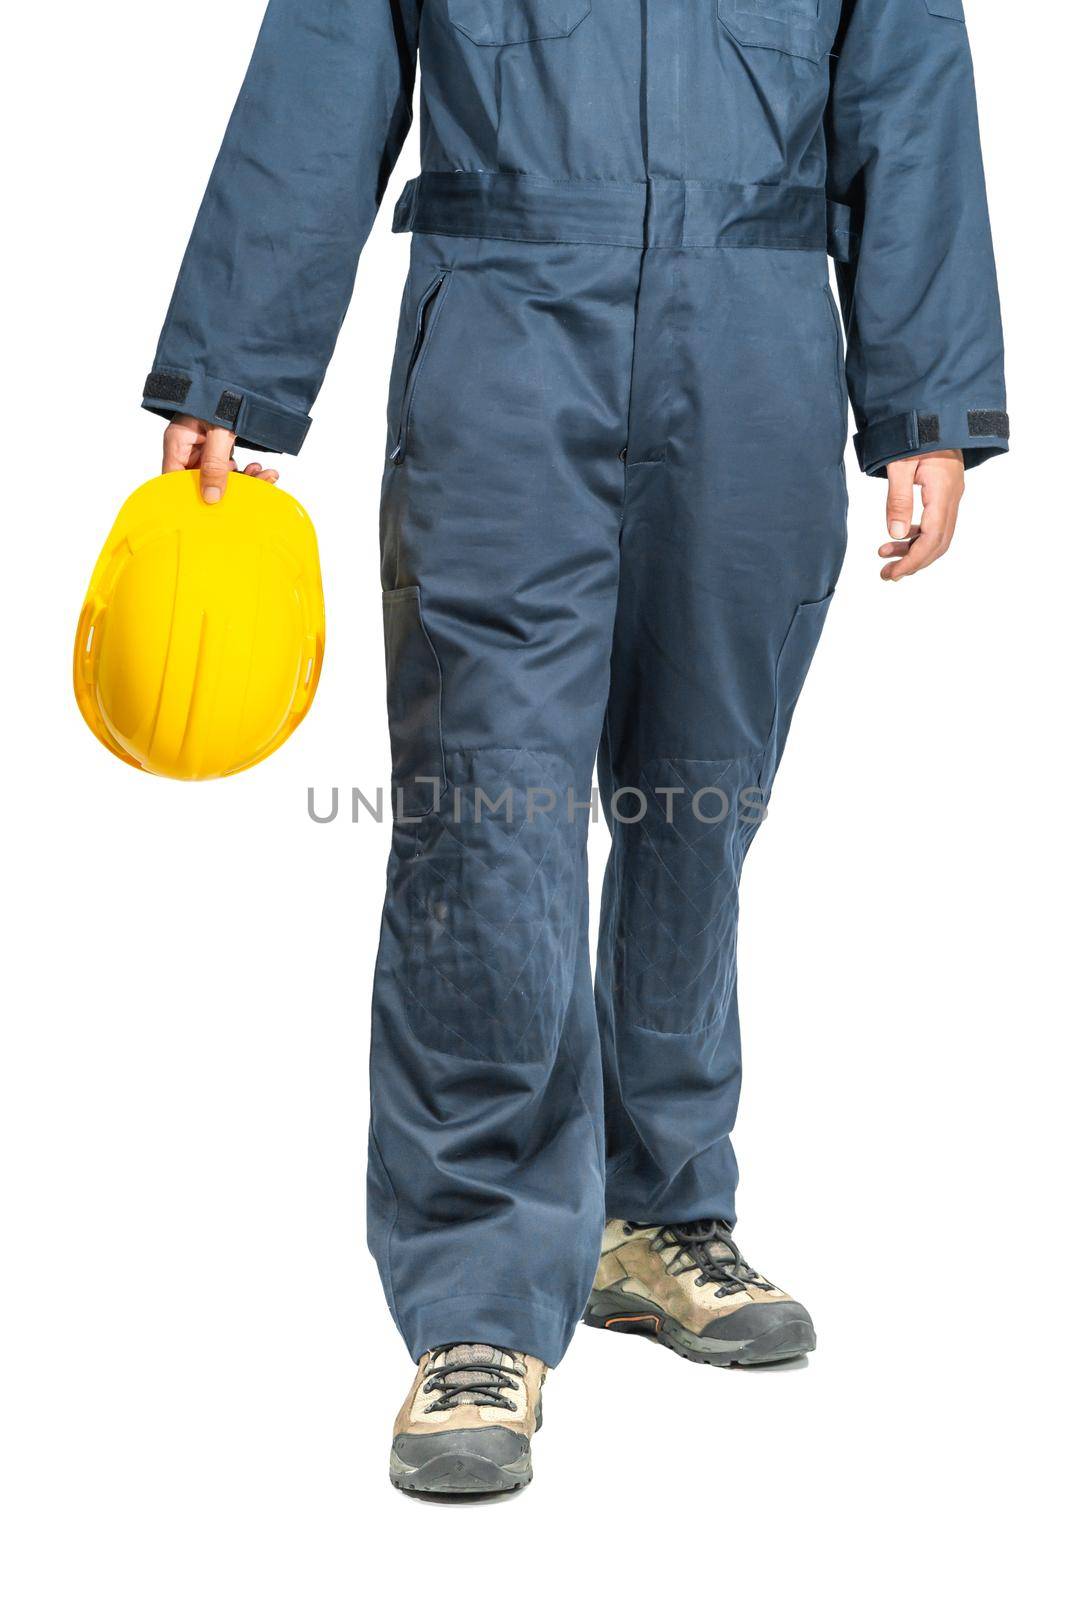 Cloes up Worker standing in blue coverall holding yellow hardhat isolated on white background